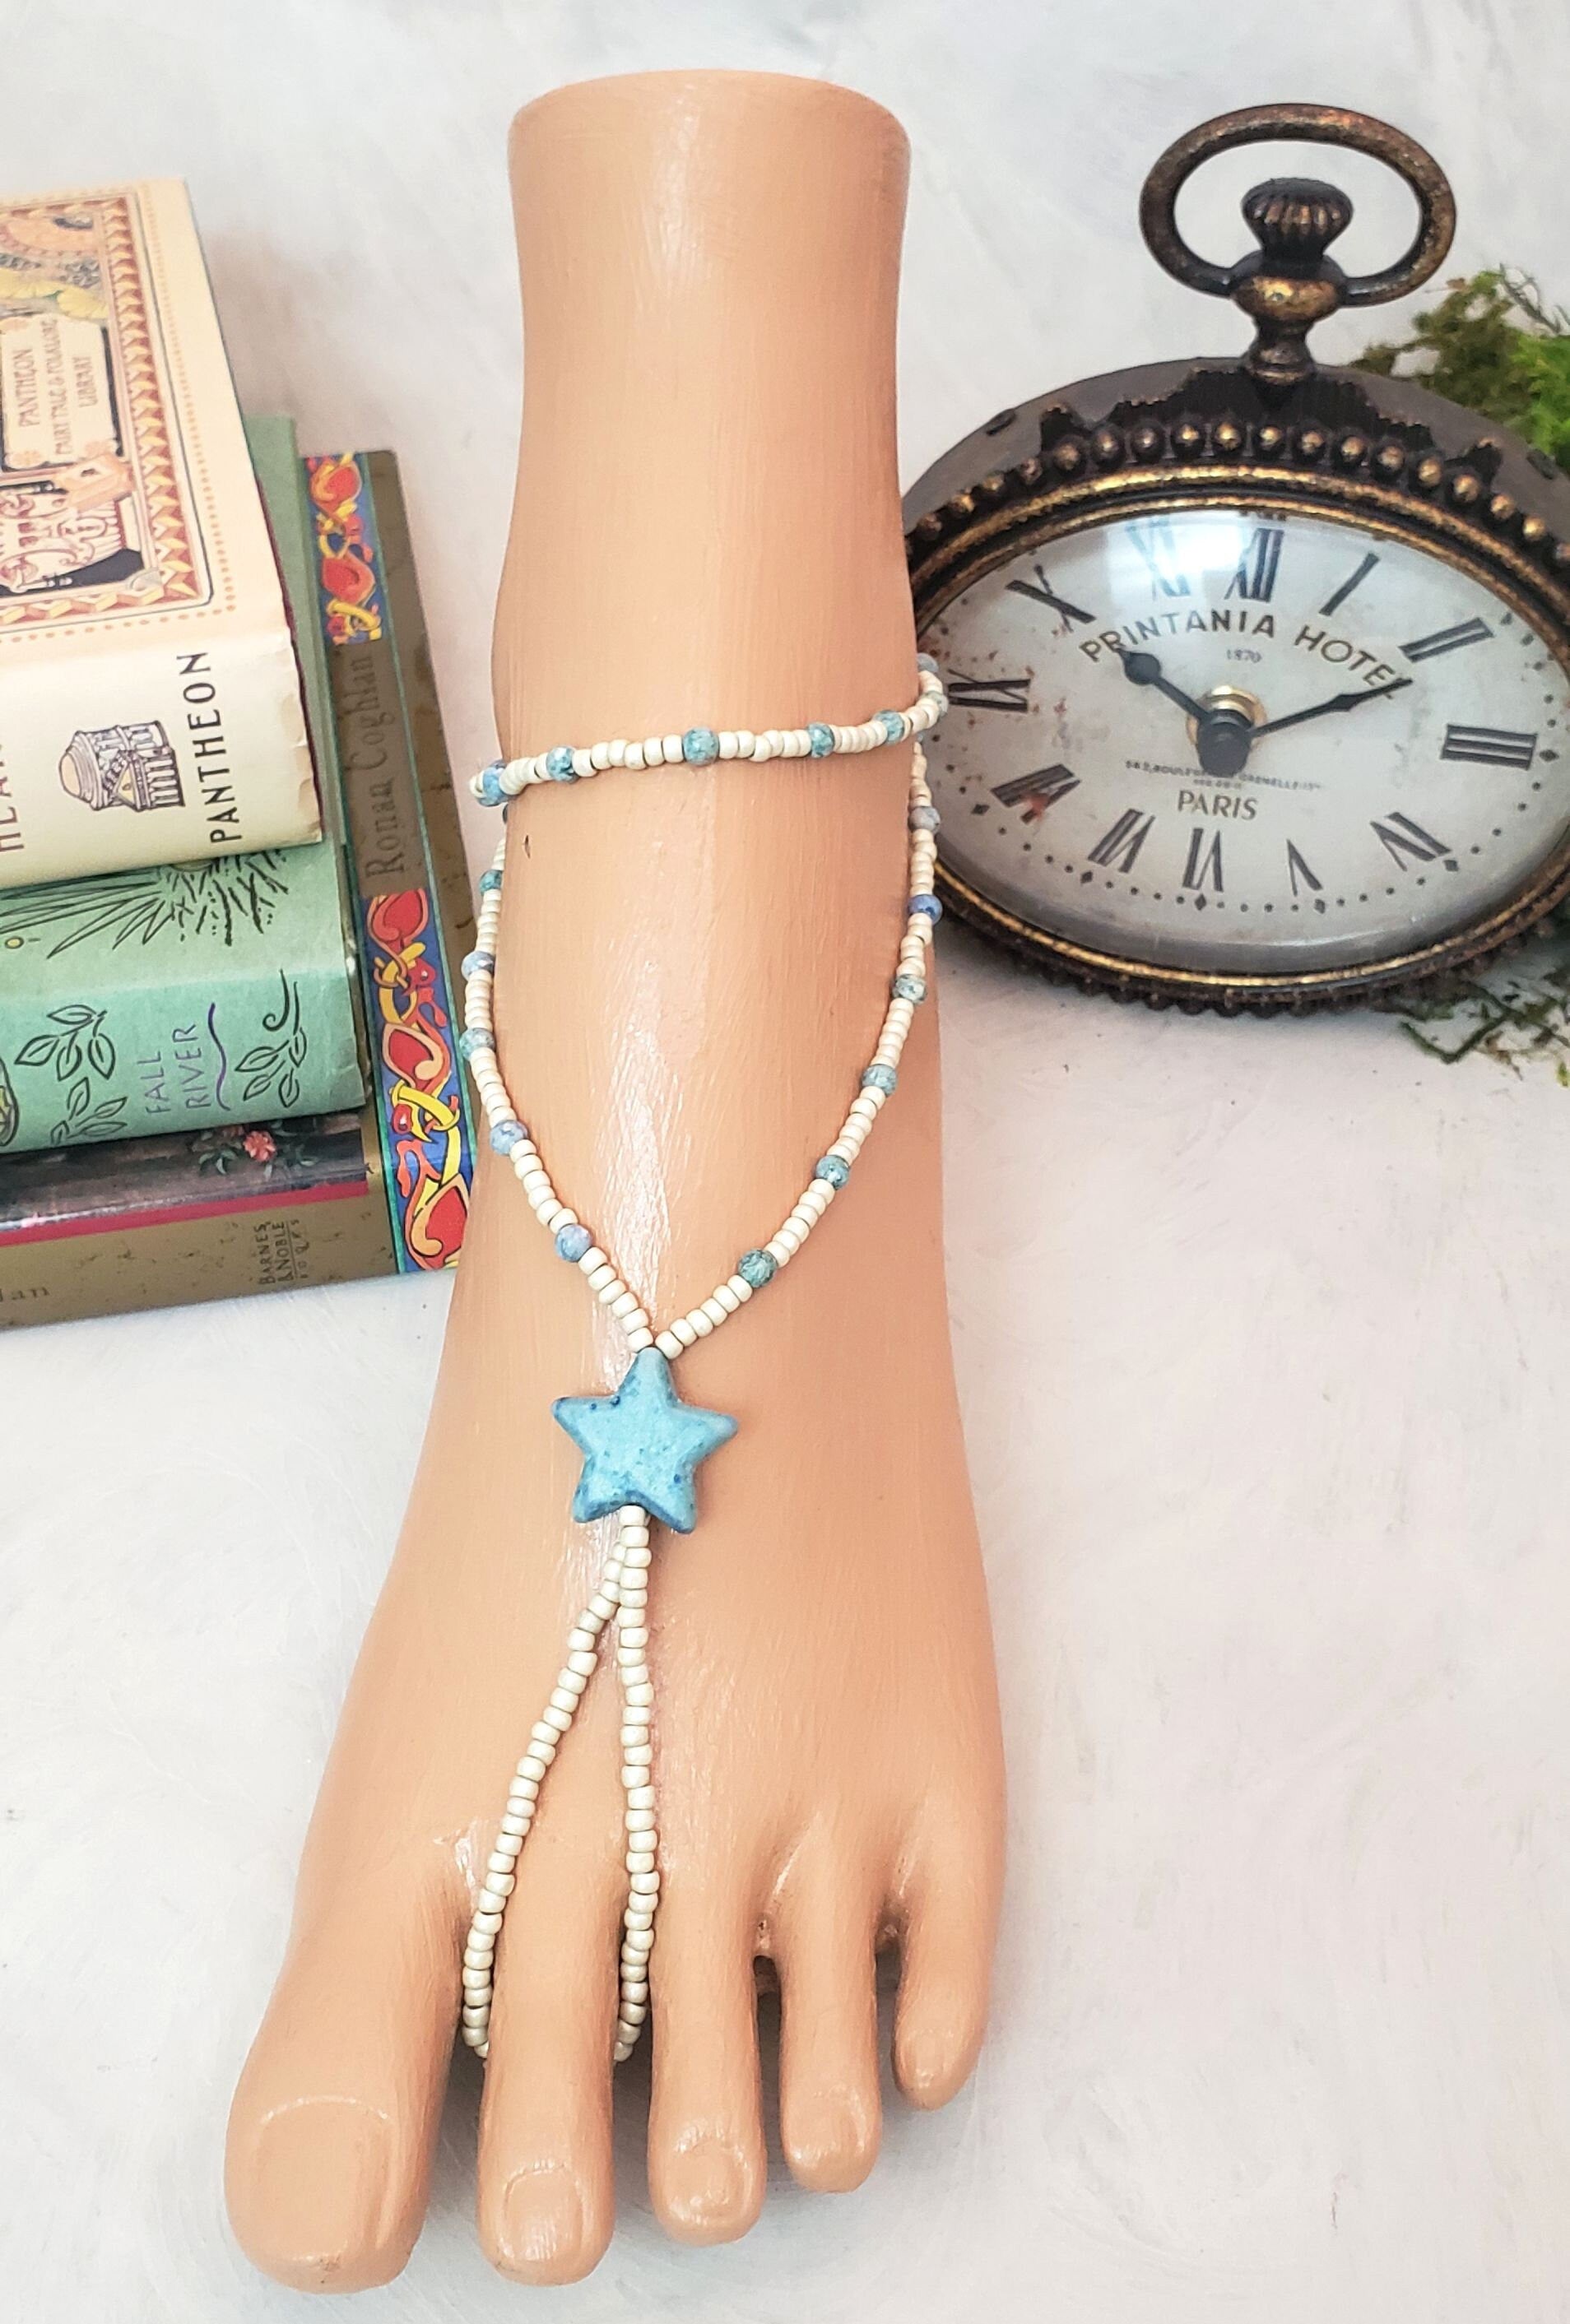 Elastic Beaded Barefoot Sandal or Hand Flower in Opaque White/Ivory + Turquoise Blue with Star, Boho, Bohemian, Gypsy, Wedding, Bridesmaid